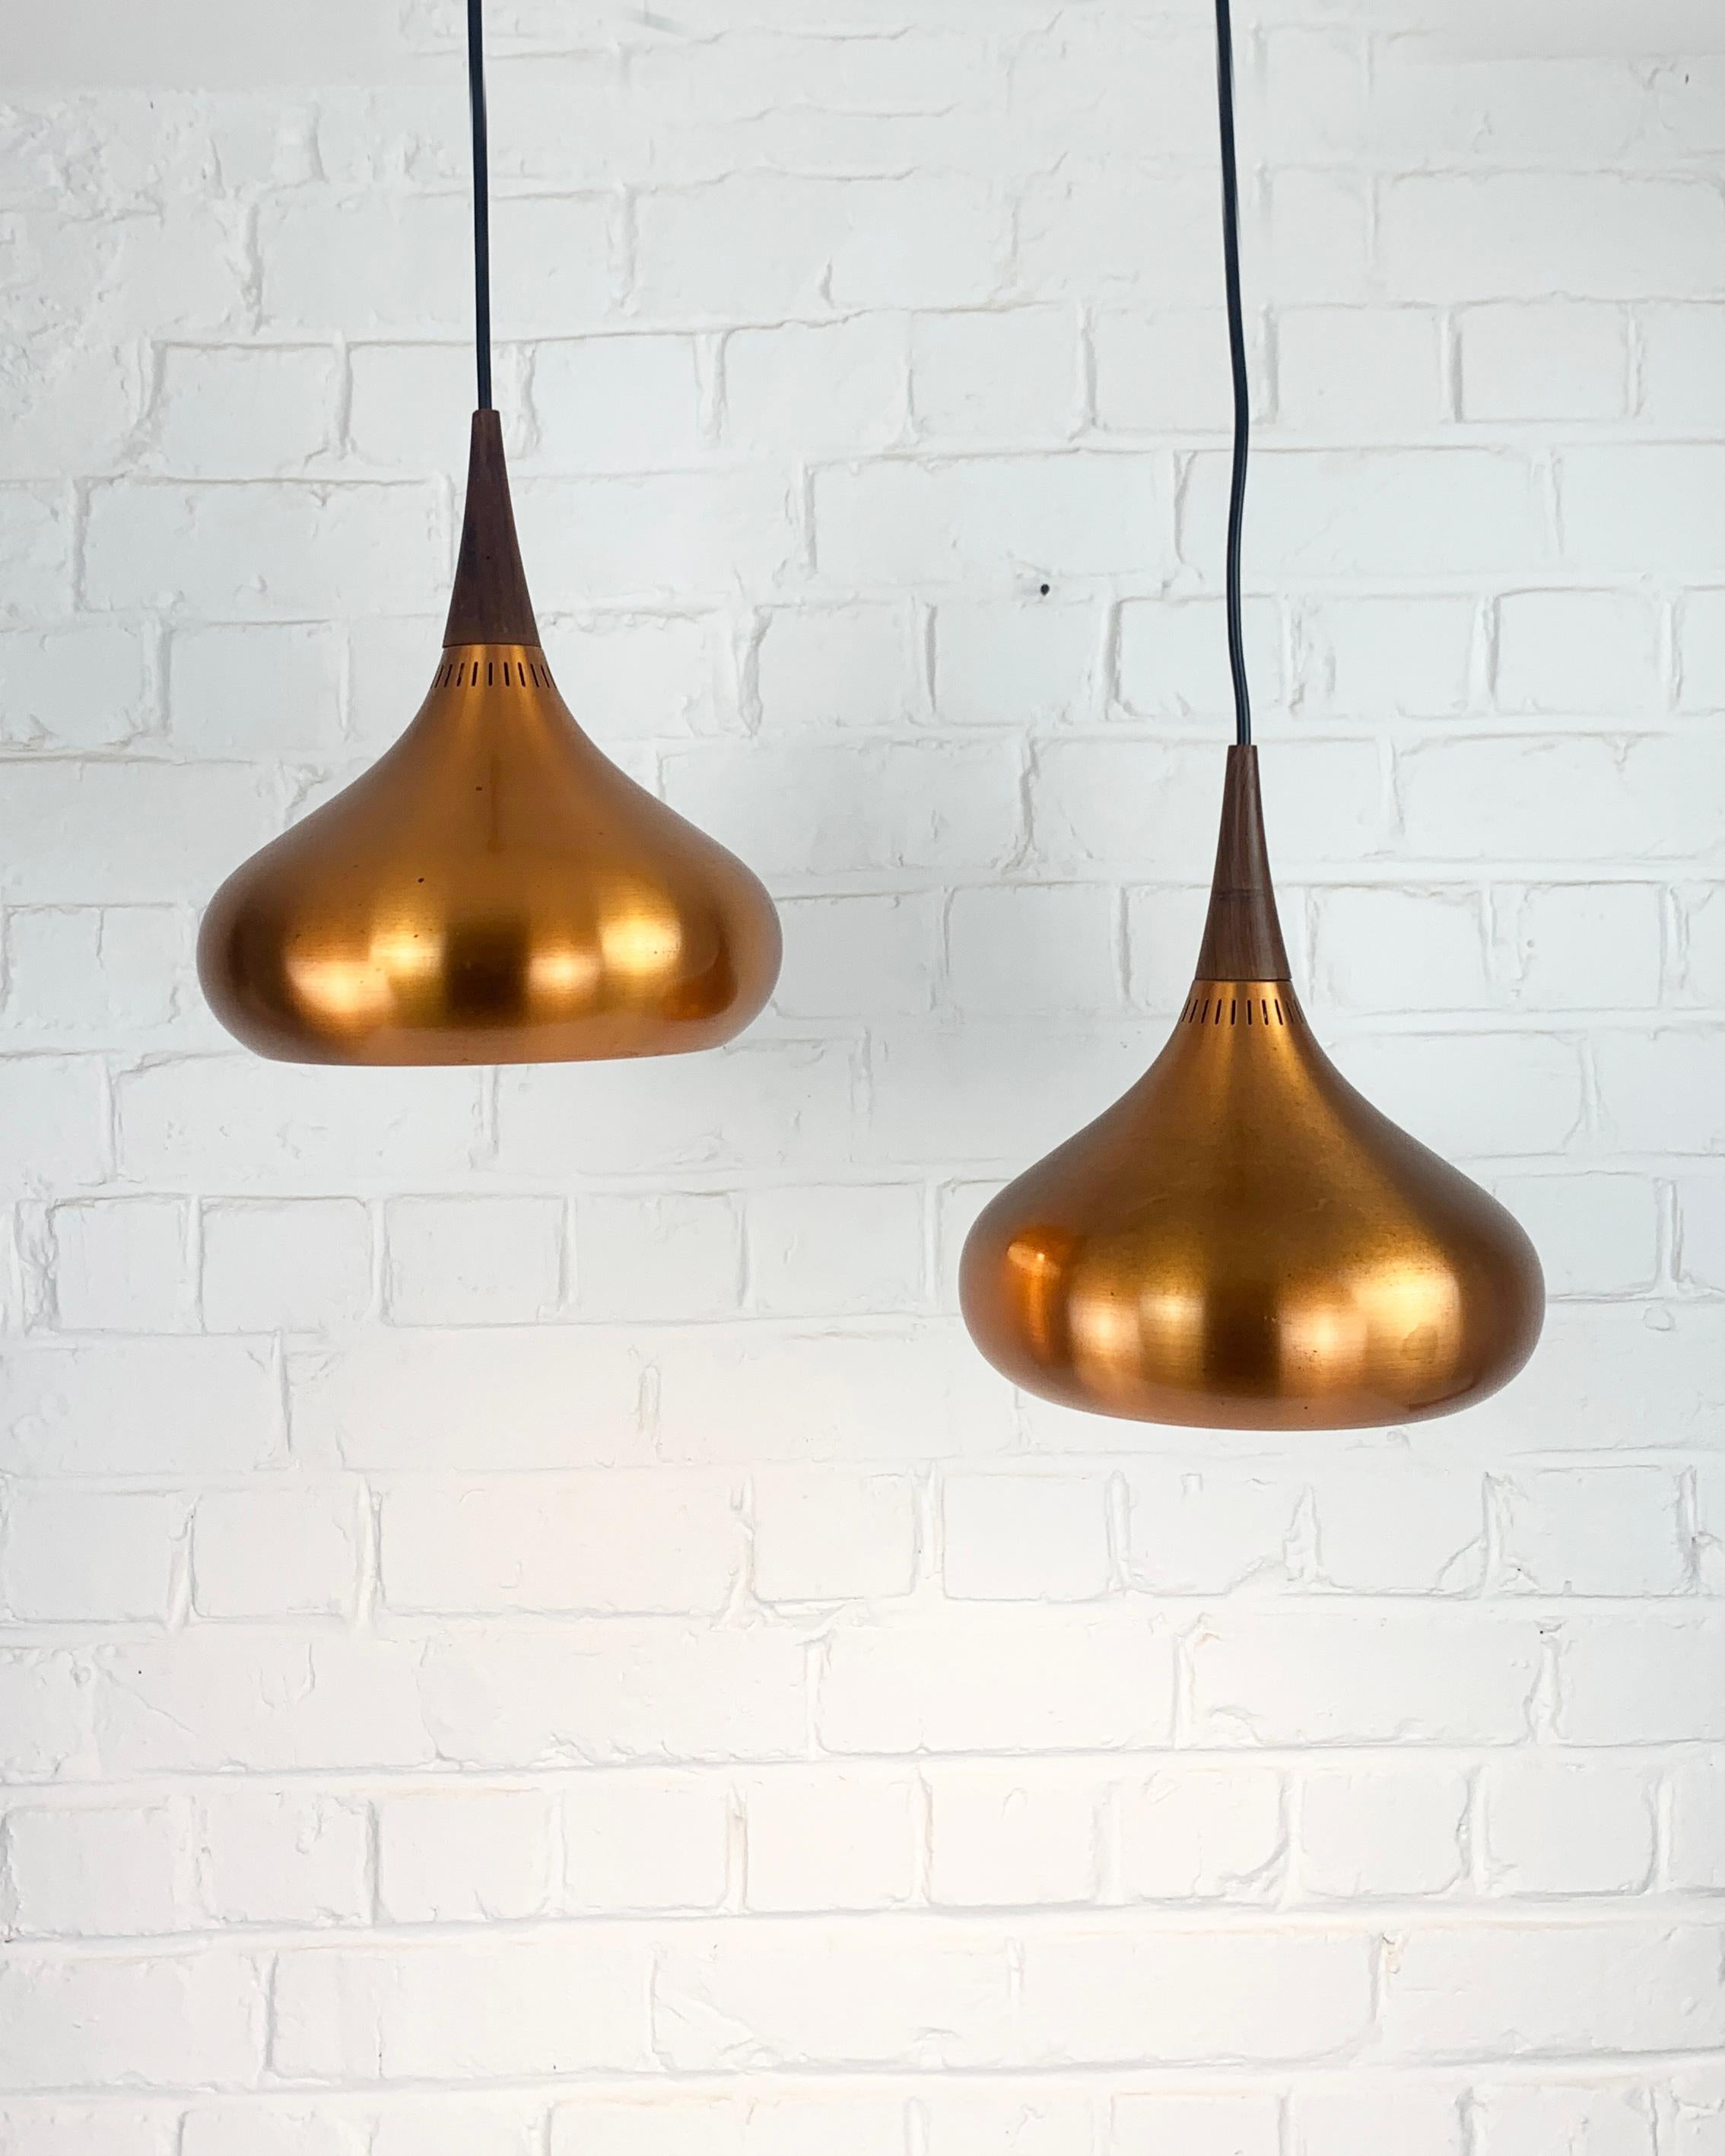 Pair of Orient Minor pendant lamps in brushed copper. Design by Jo Hammerborg in 1957 for Fog & Morup, Denmark. 

Jo Hammerborg has been the art director of Fog & Morup for over 20 years. He designed a multitude of models, including the Orient